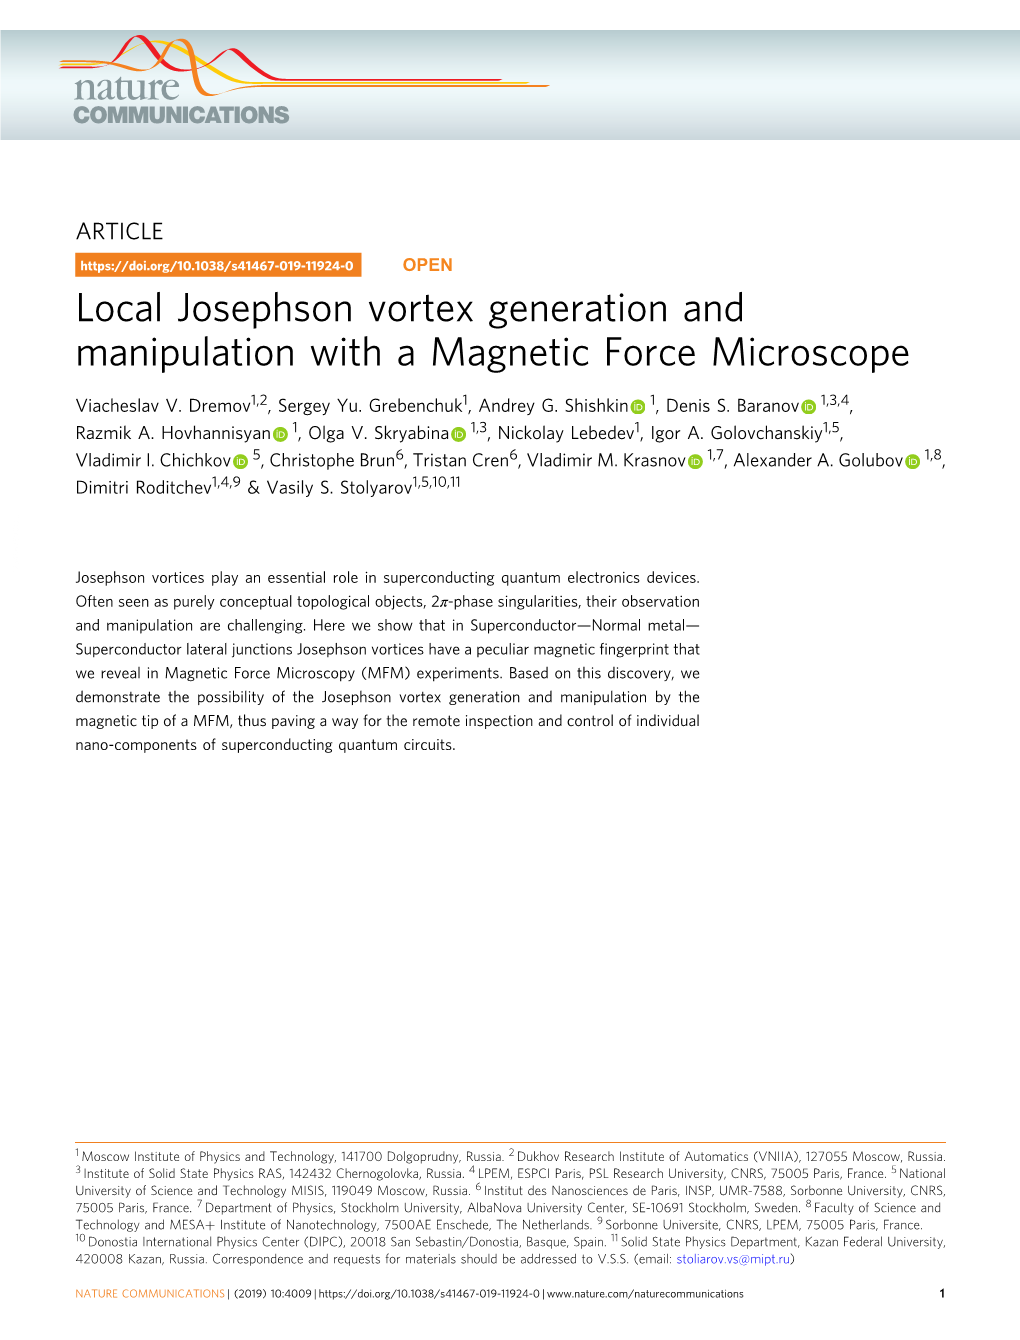 Local Josephson Vortex Generation and Manipulation with a Magnetic Force Microscope